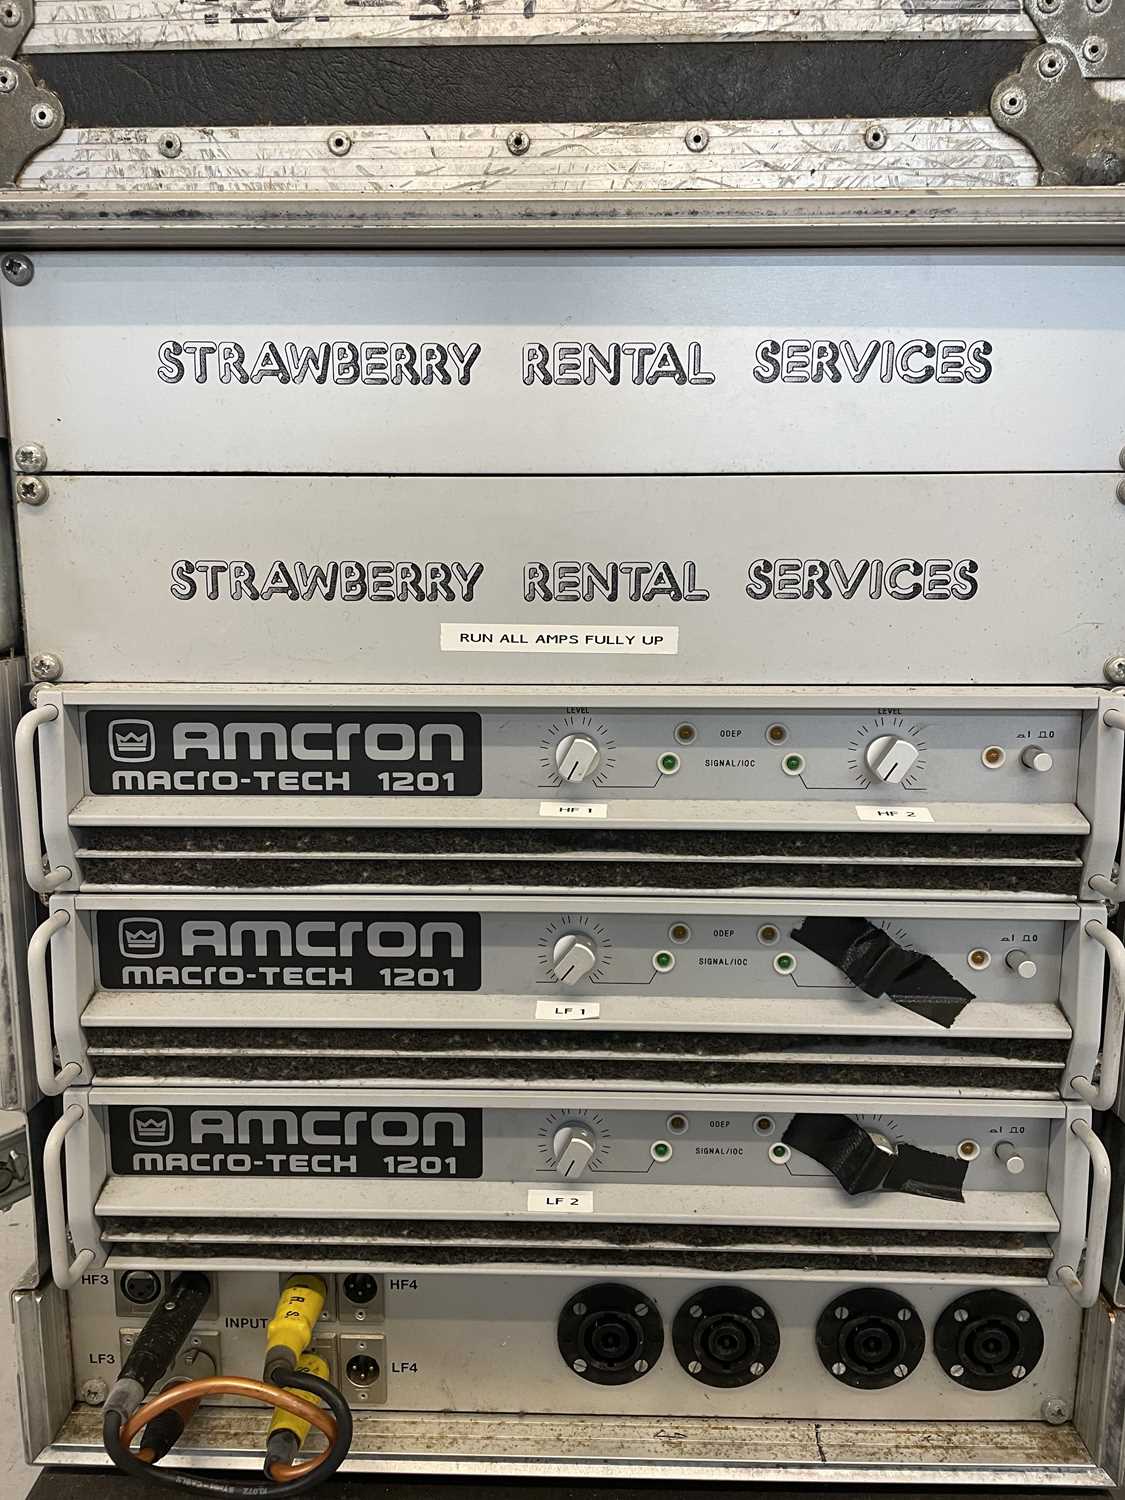 STRAWBERRY STUDIOS - STRAWBERRY RENTALS COLLECTION - FLIGHT CASE WITH AMCRON MACRO TECH 1201 AMPS. - Image 2 of 5